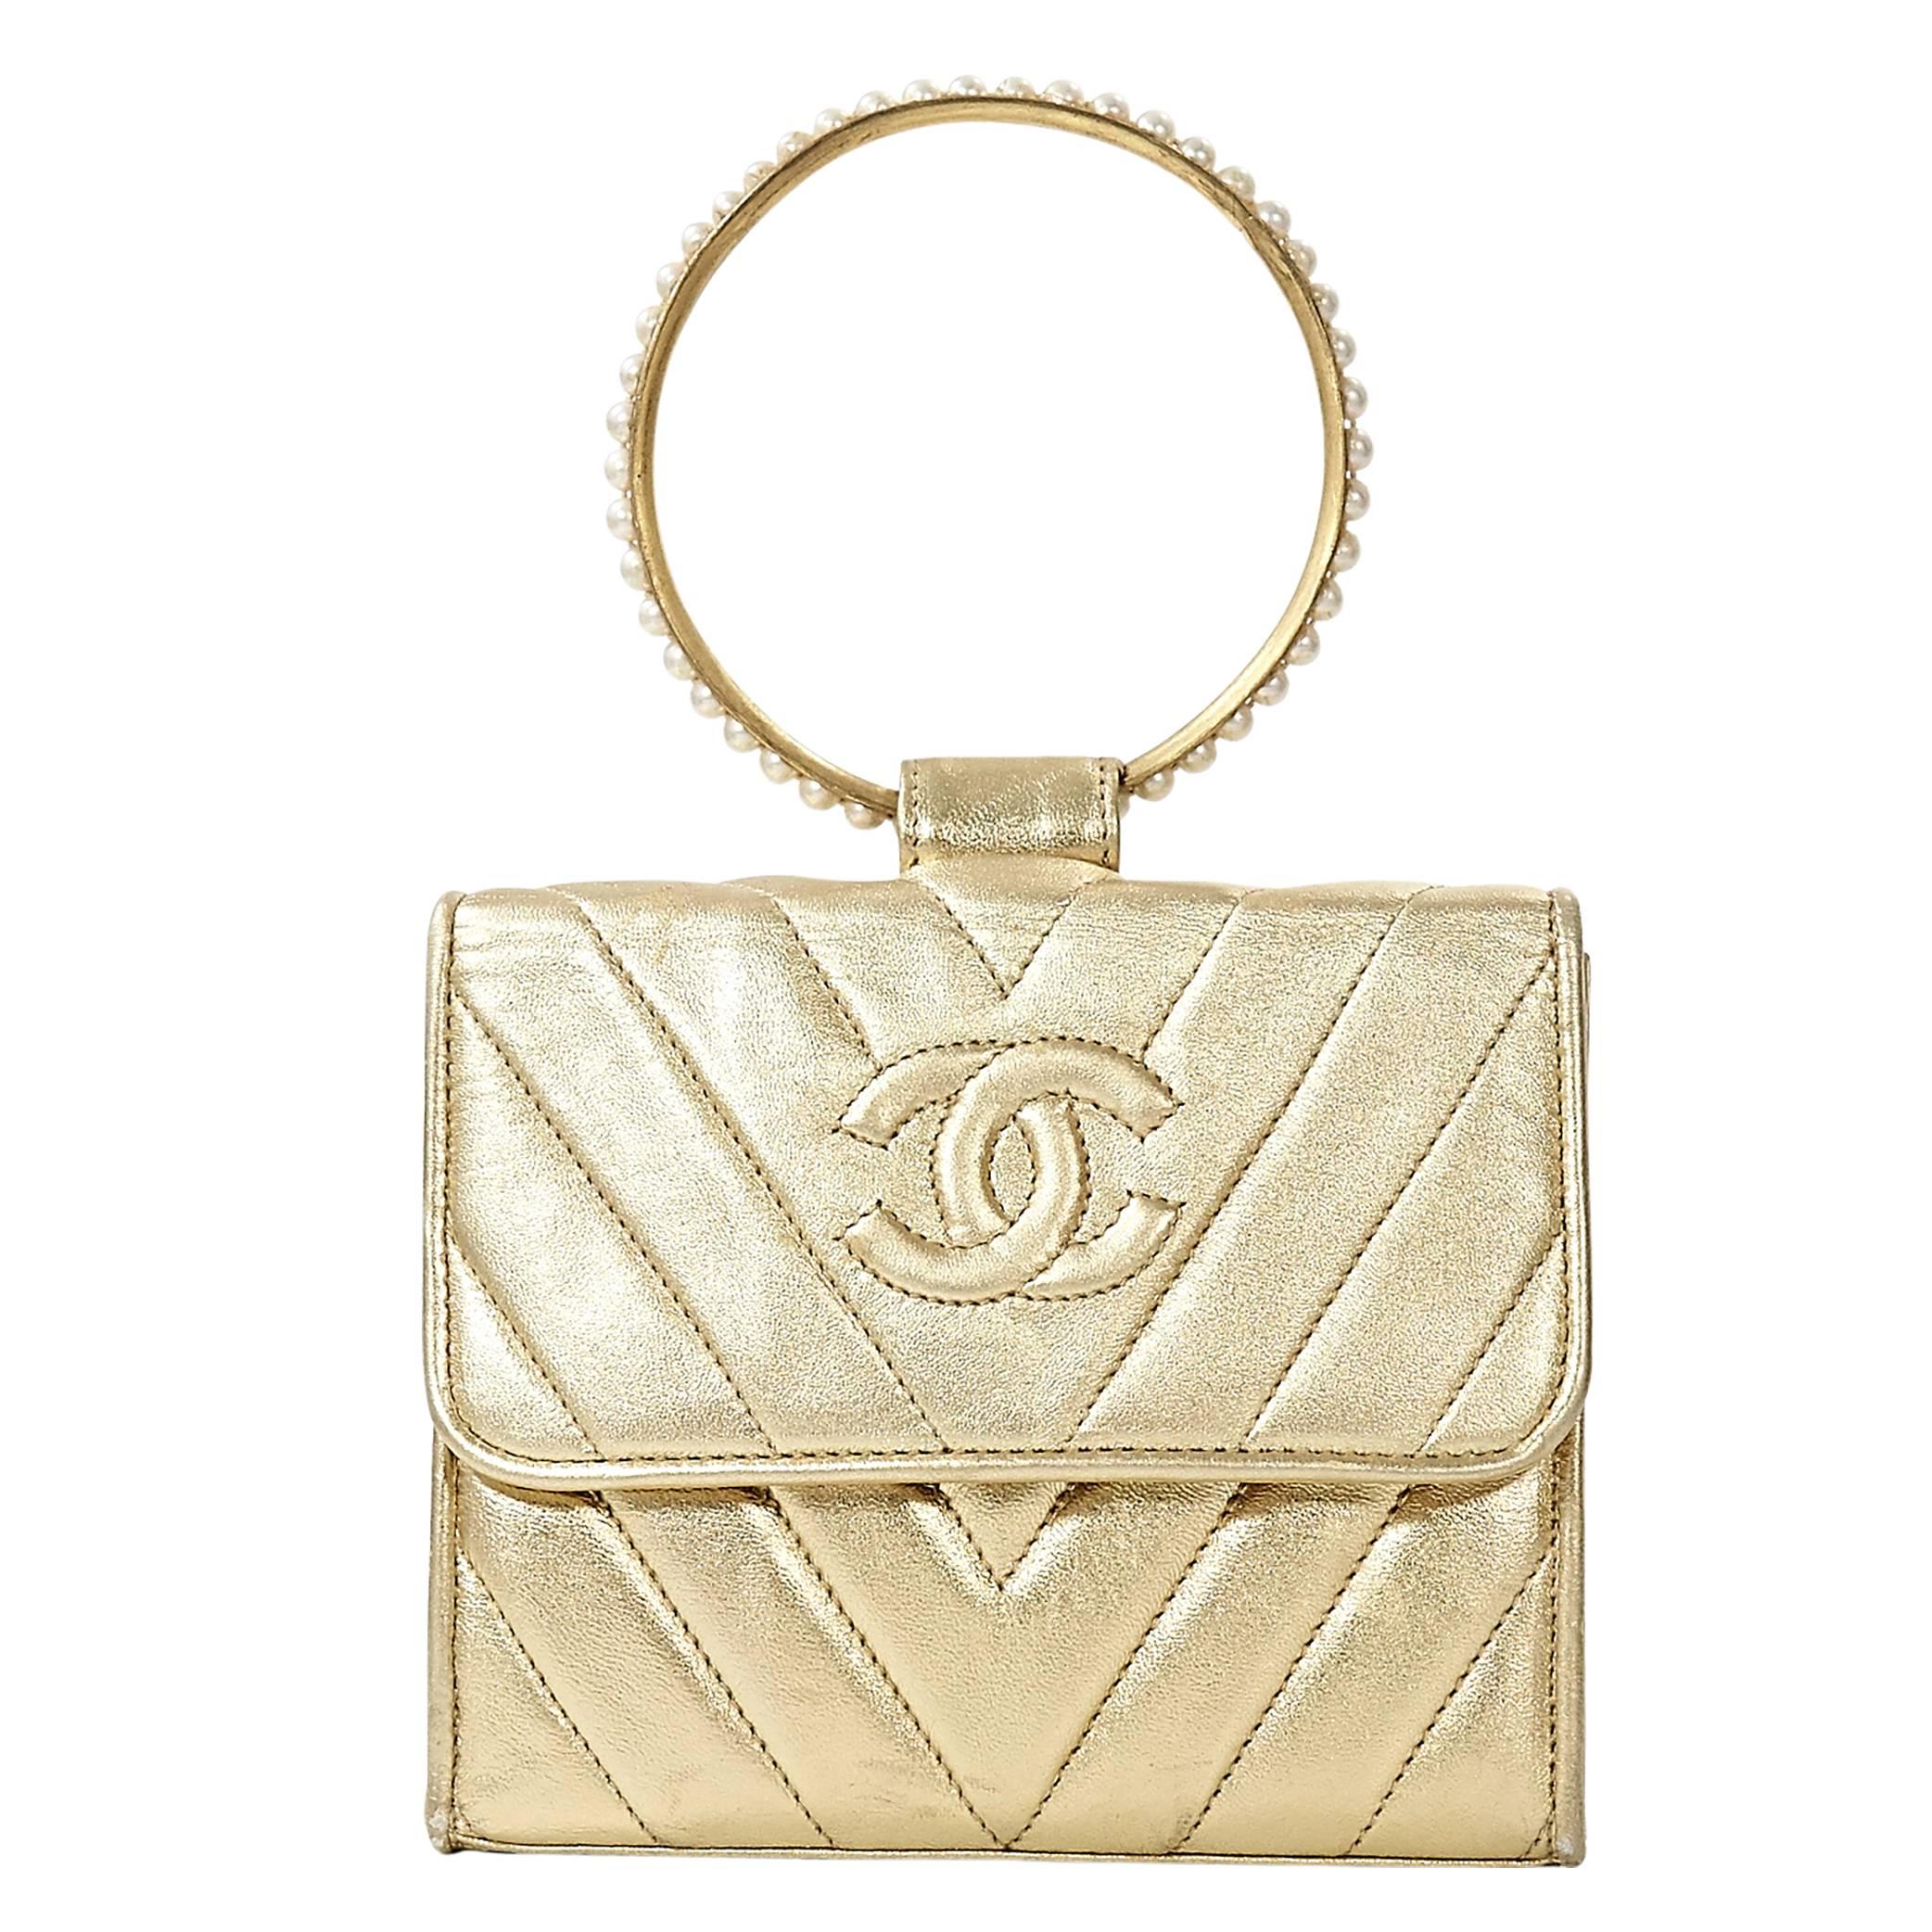 Gold Chanel Top Handle Evening Bag